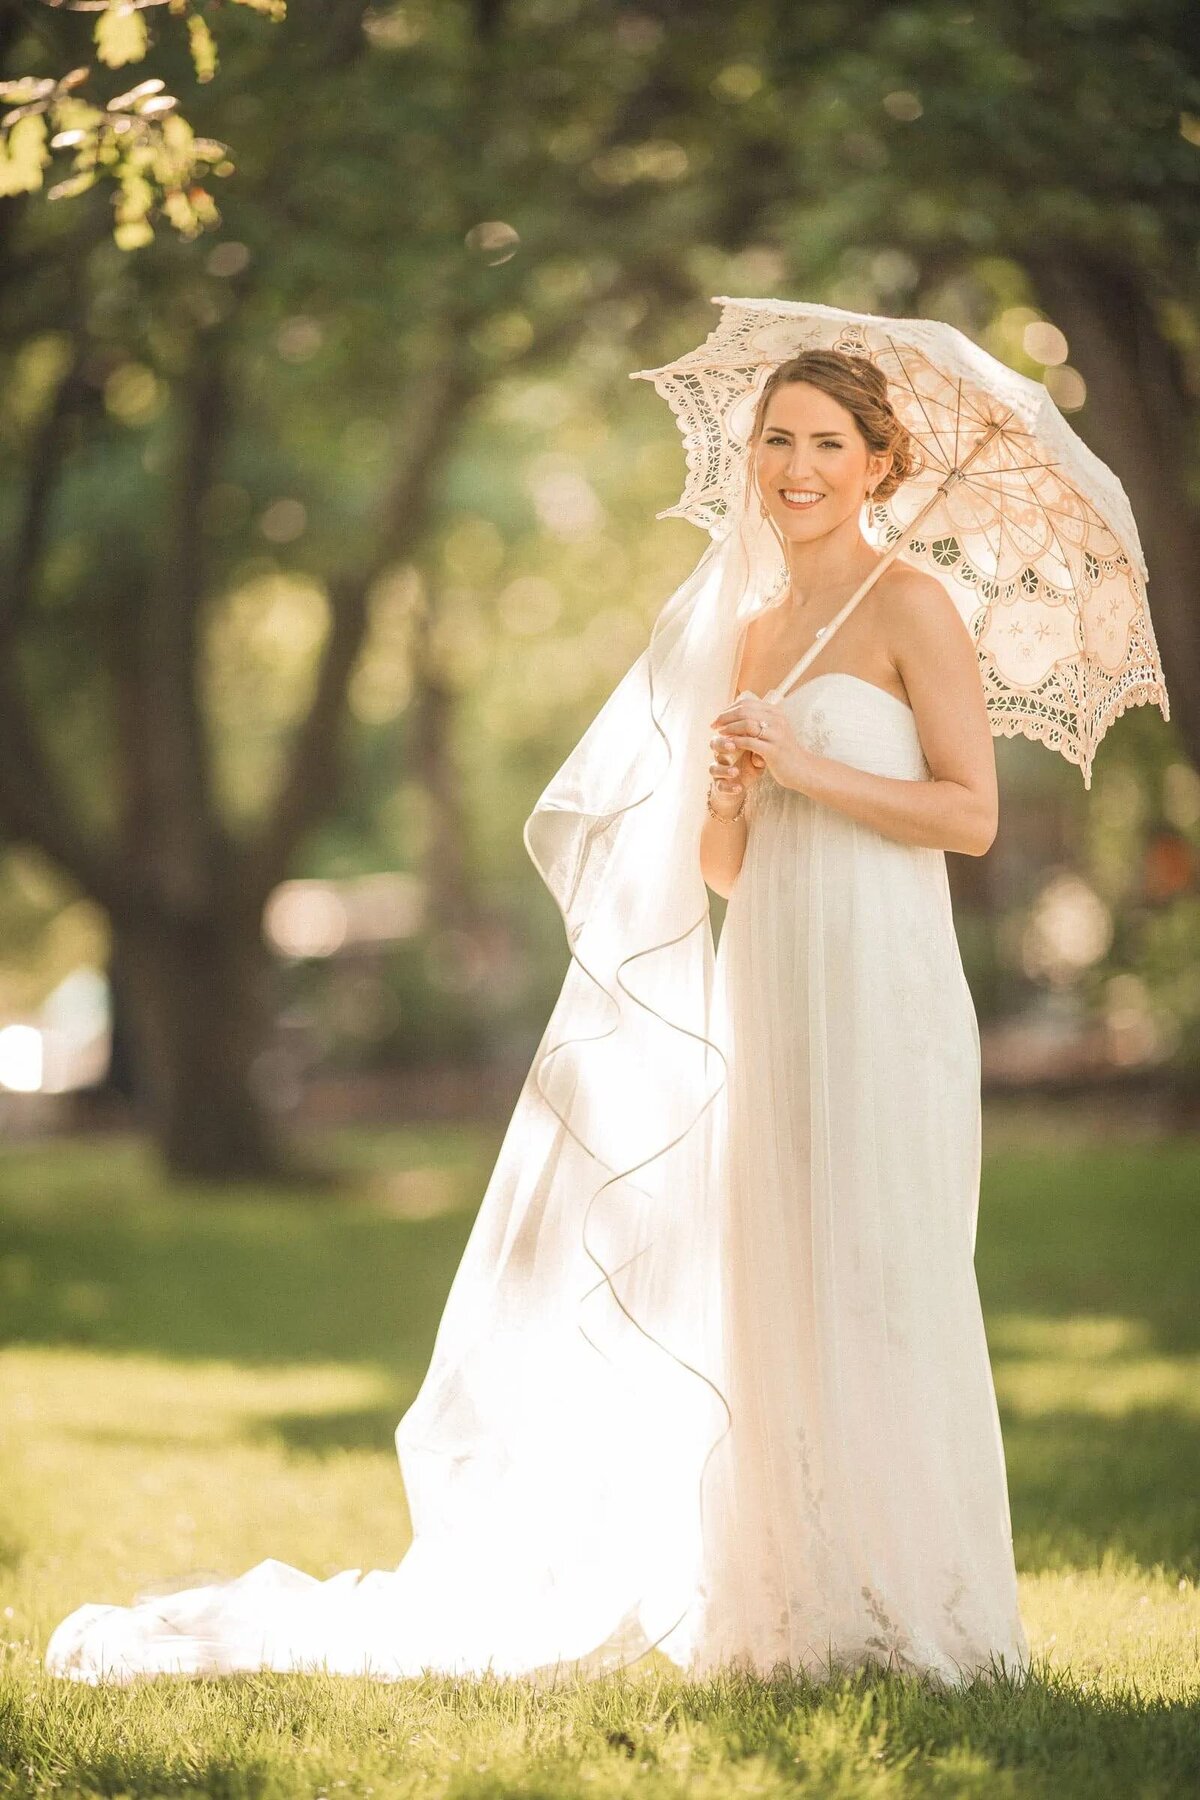 A bride under the shade of a lace parasol shines with happiness, the soft sunlight highlighting her bridal glow.